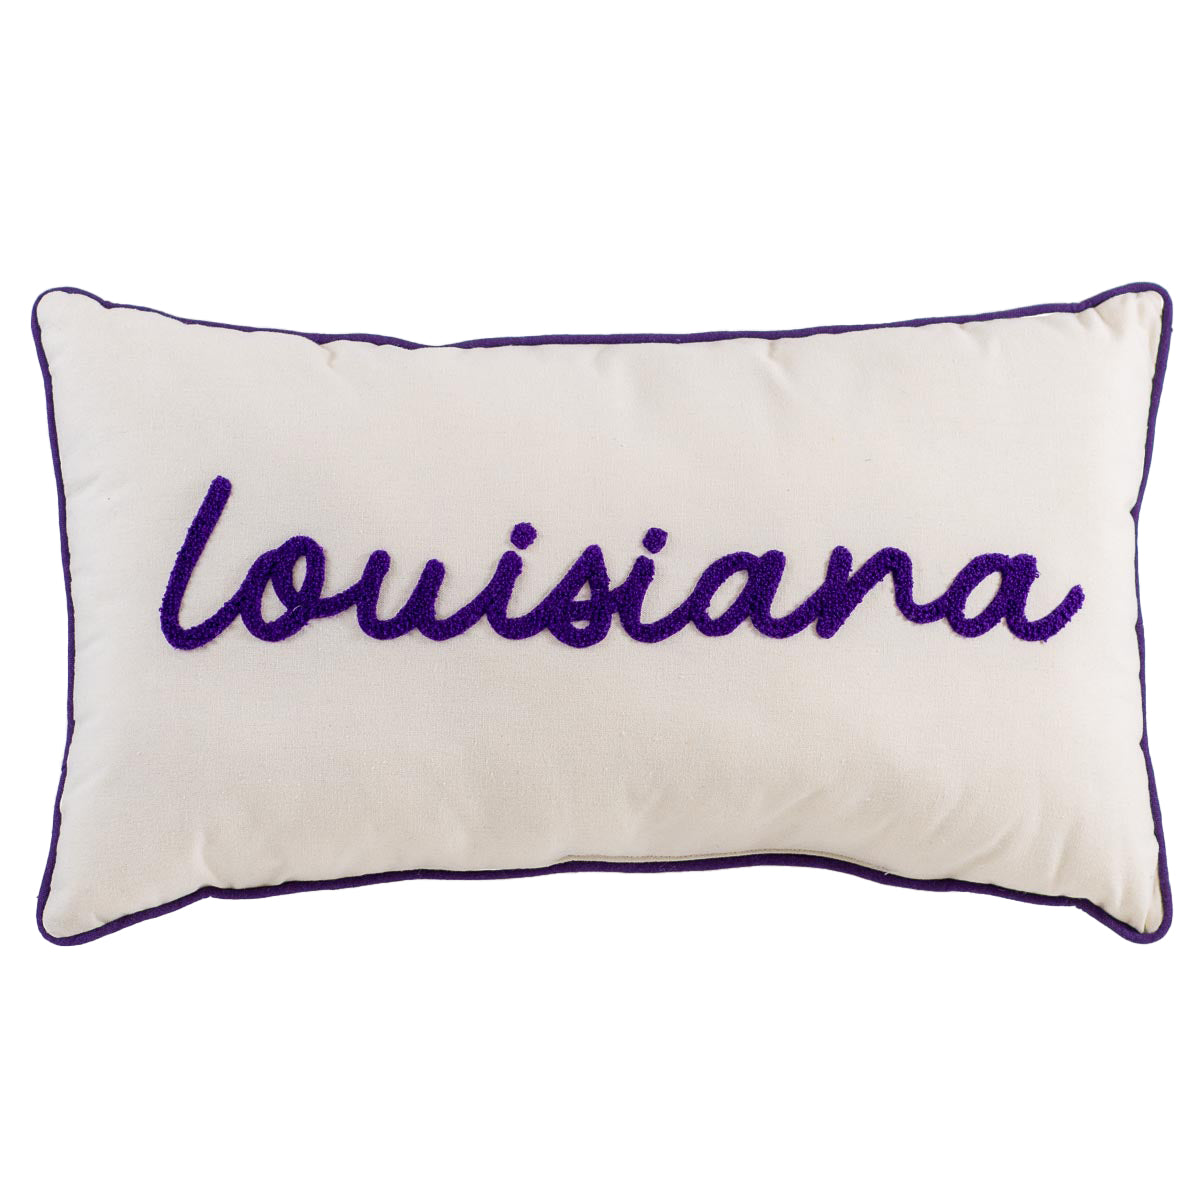 Louisiana Embroidered Pillow in Purple